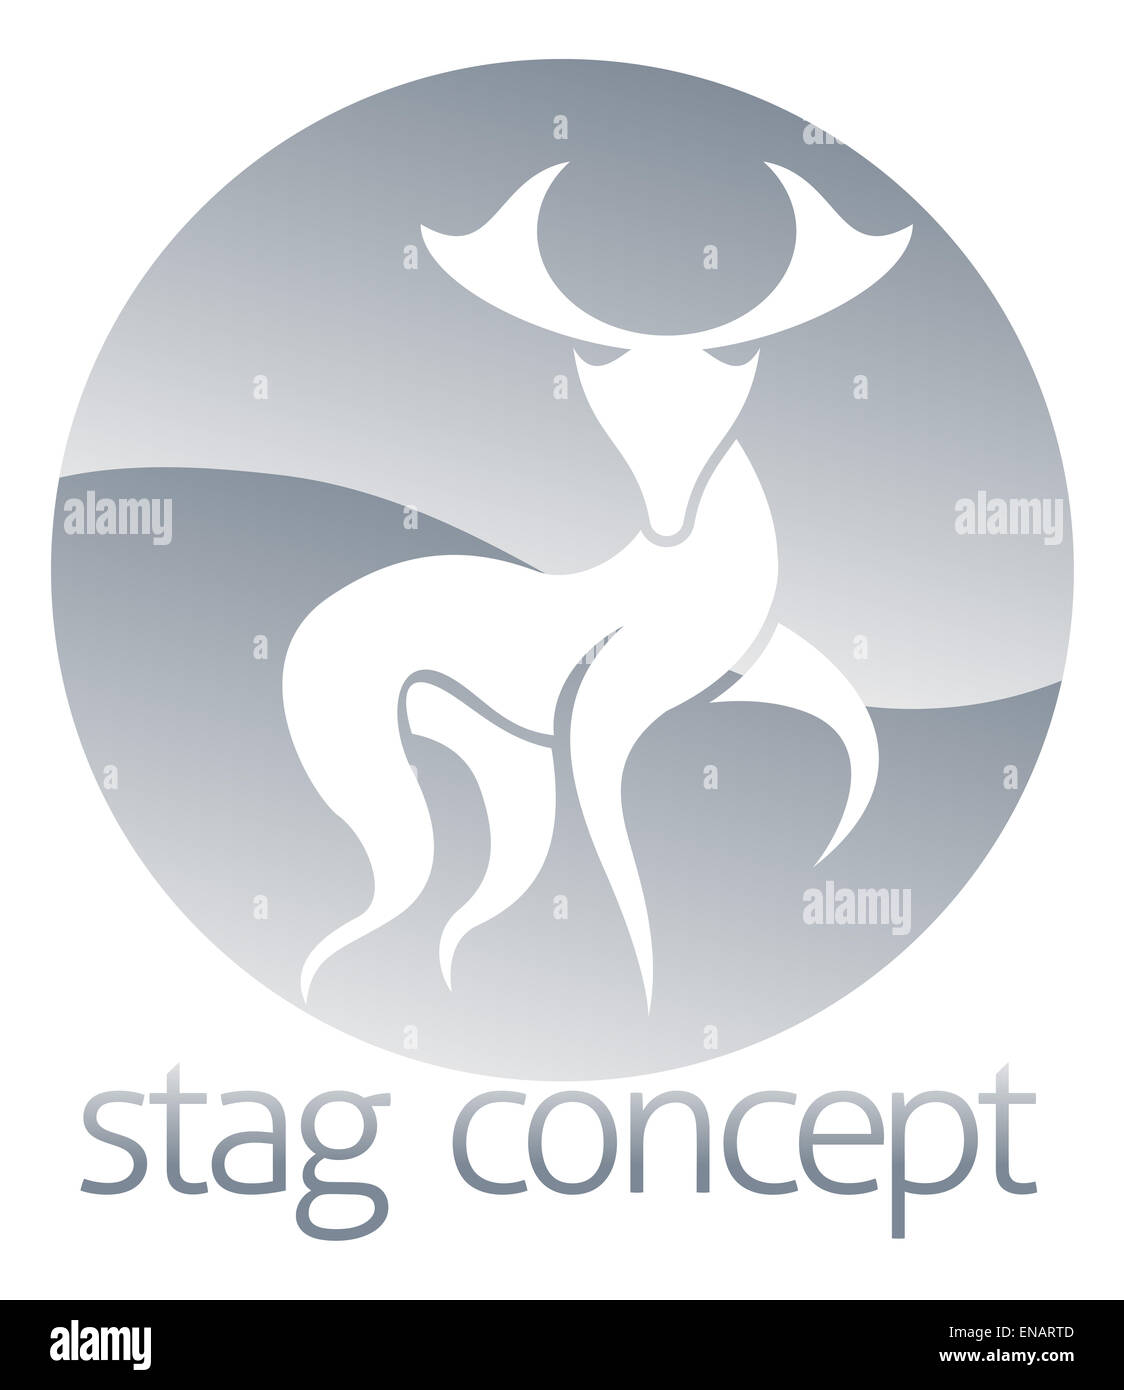 An abstract illustration of a stag deer concept design circle concept design Stock Photo